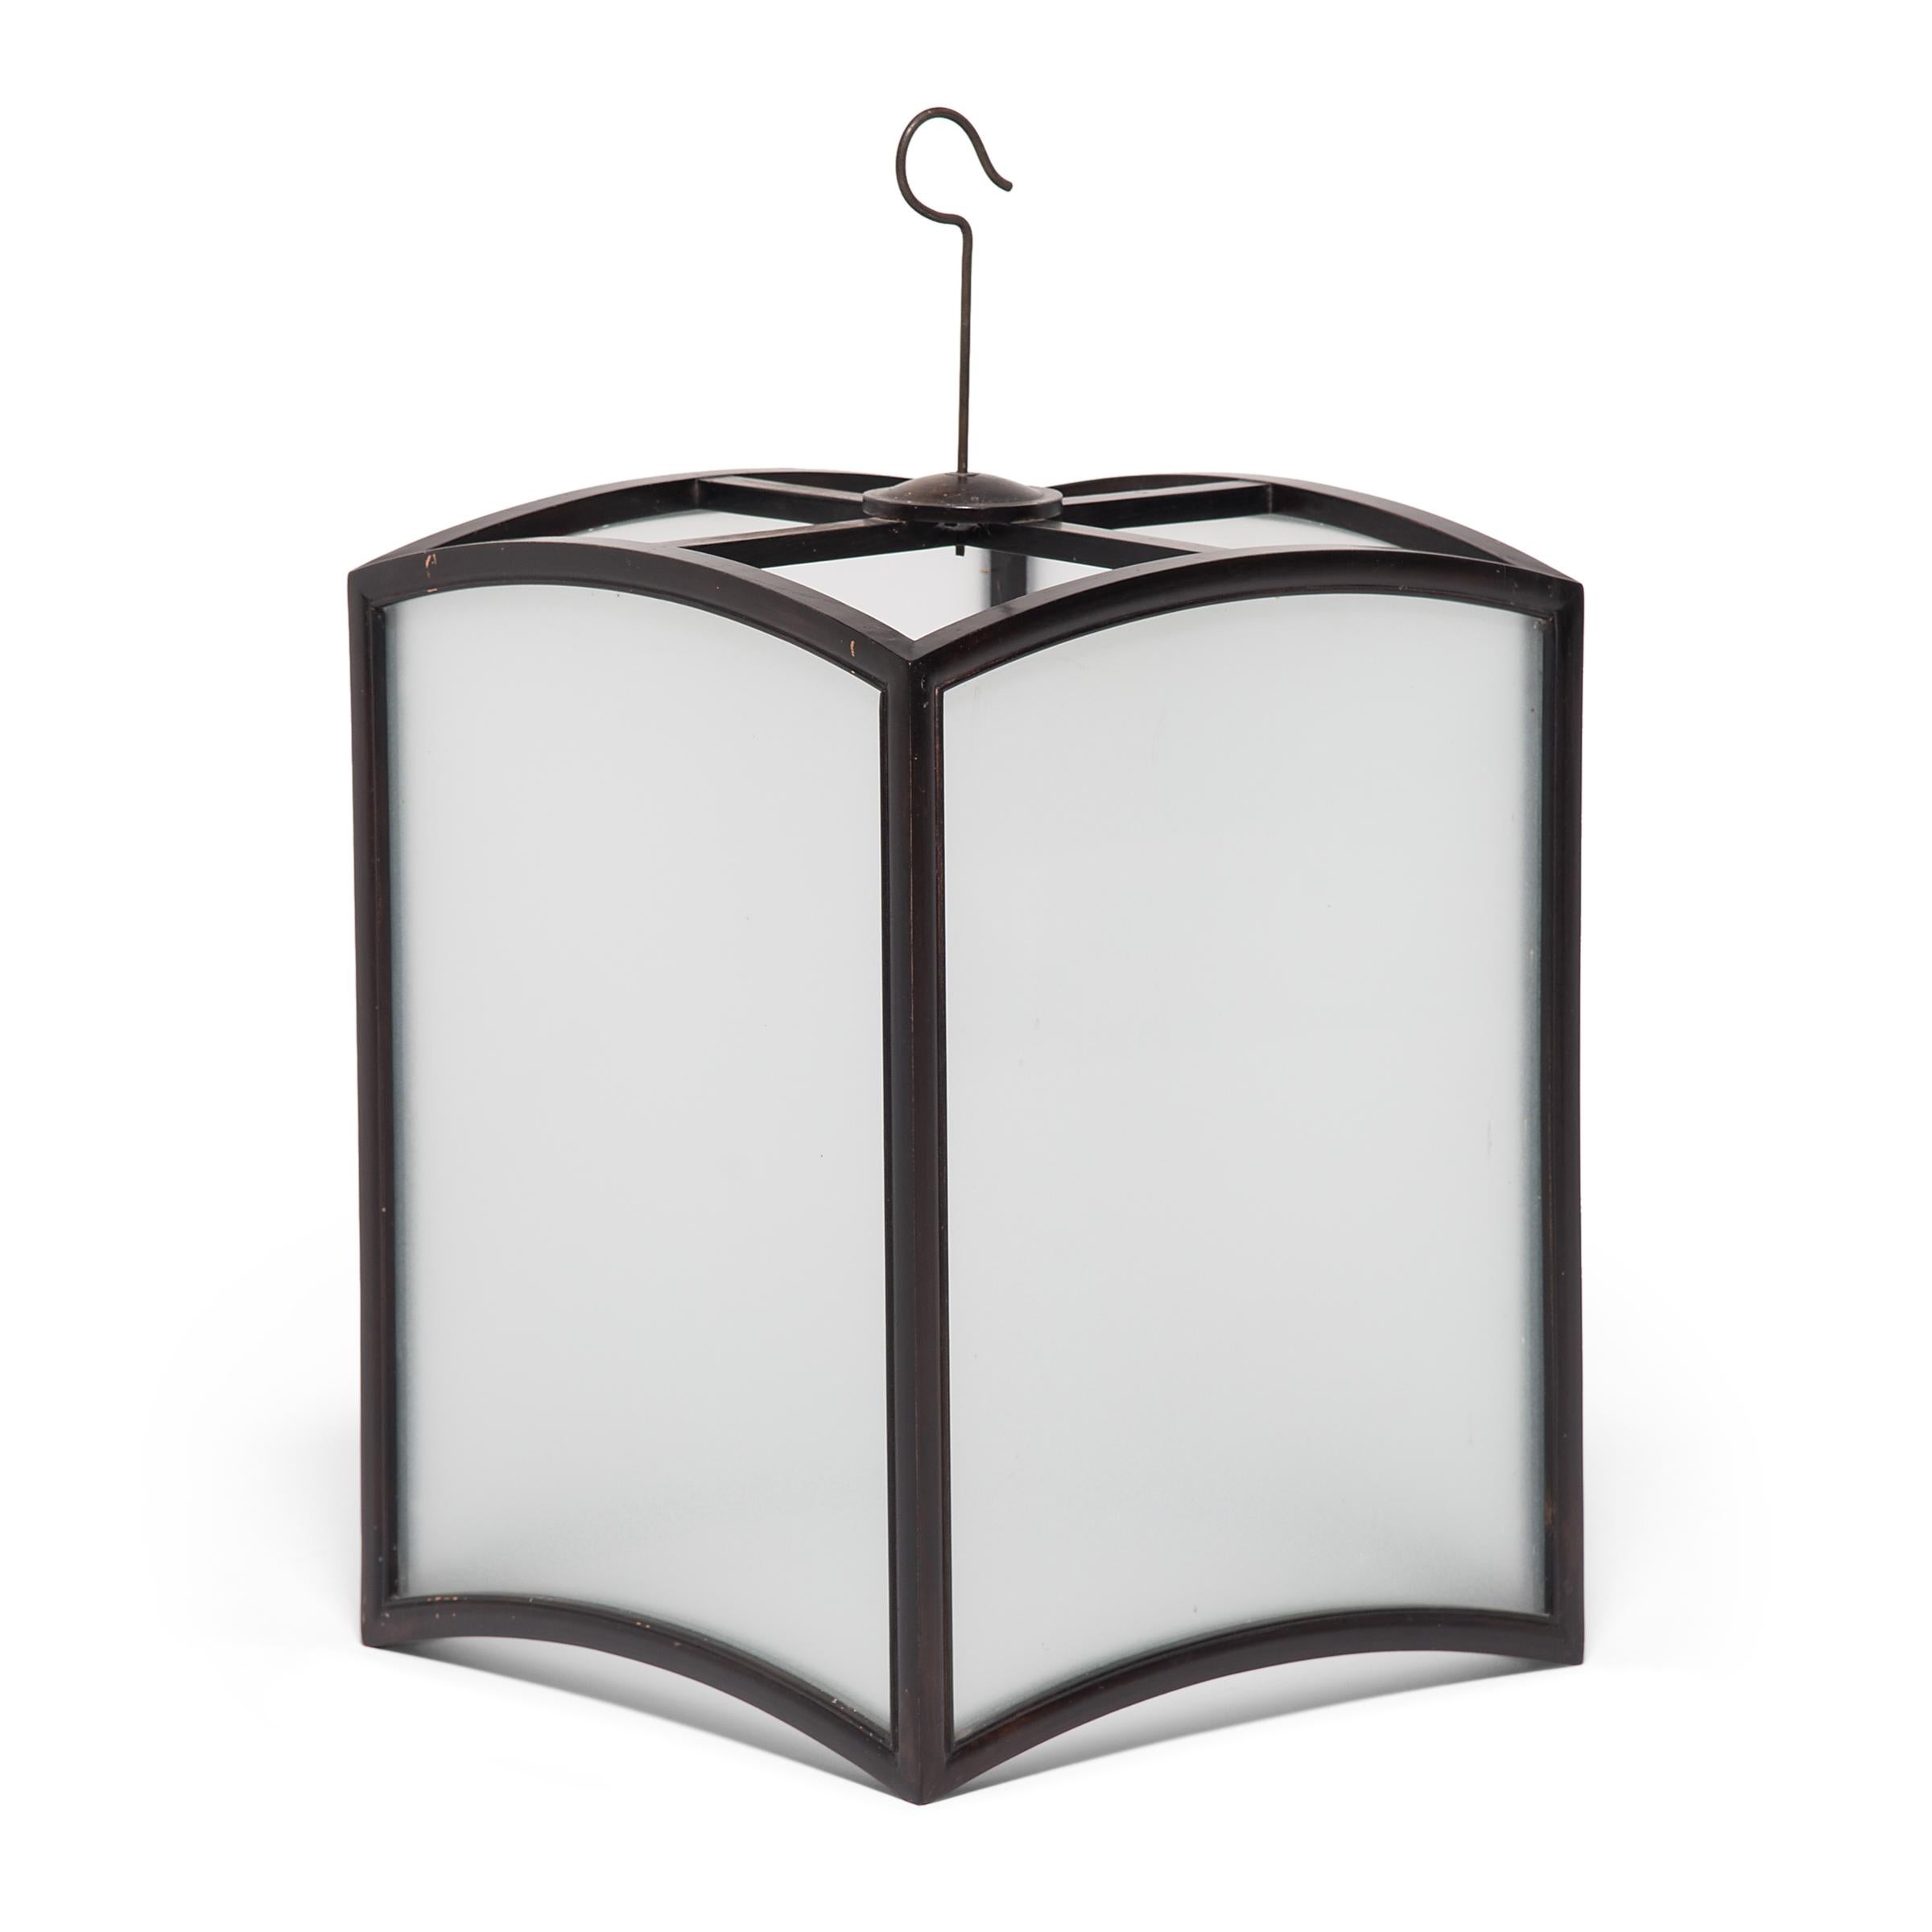 Framed in northern elmwood, this elegant lantern casts a soft glow through frosted glass. Exemplifying the refined simplicity of 19th century Chinese decor, the lantern's clean lines and graceful form make it a versatile lighting option for modern